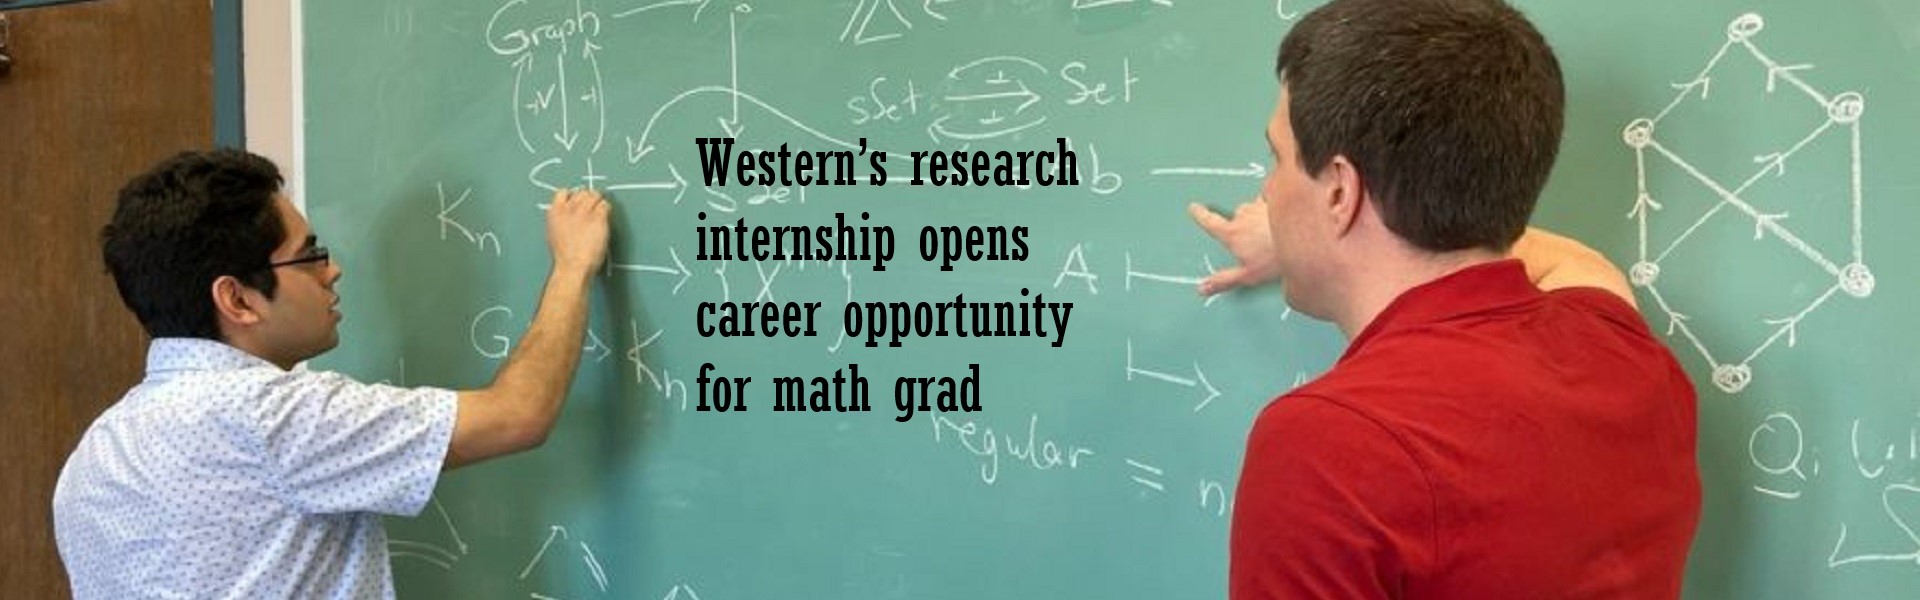 Western’s research internship opens career opportunity for math gradDaniel Carranza’s research earns him PhD spot at Johns Hopkins